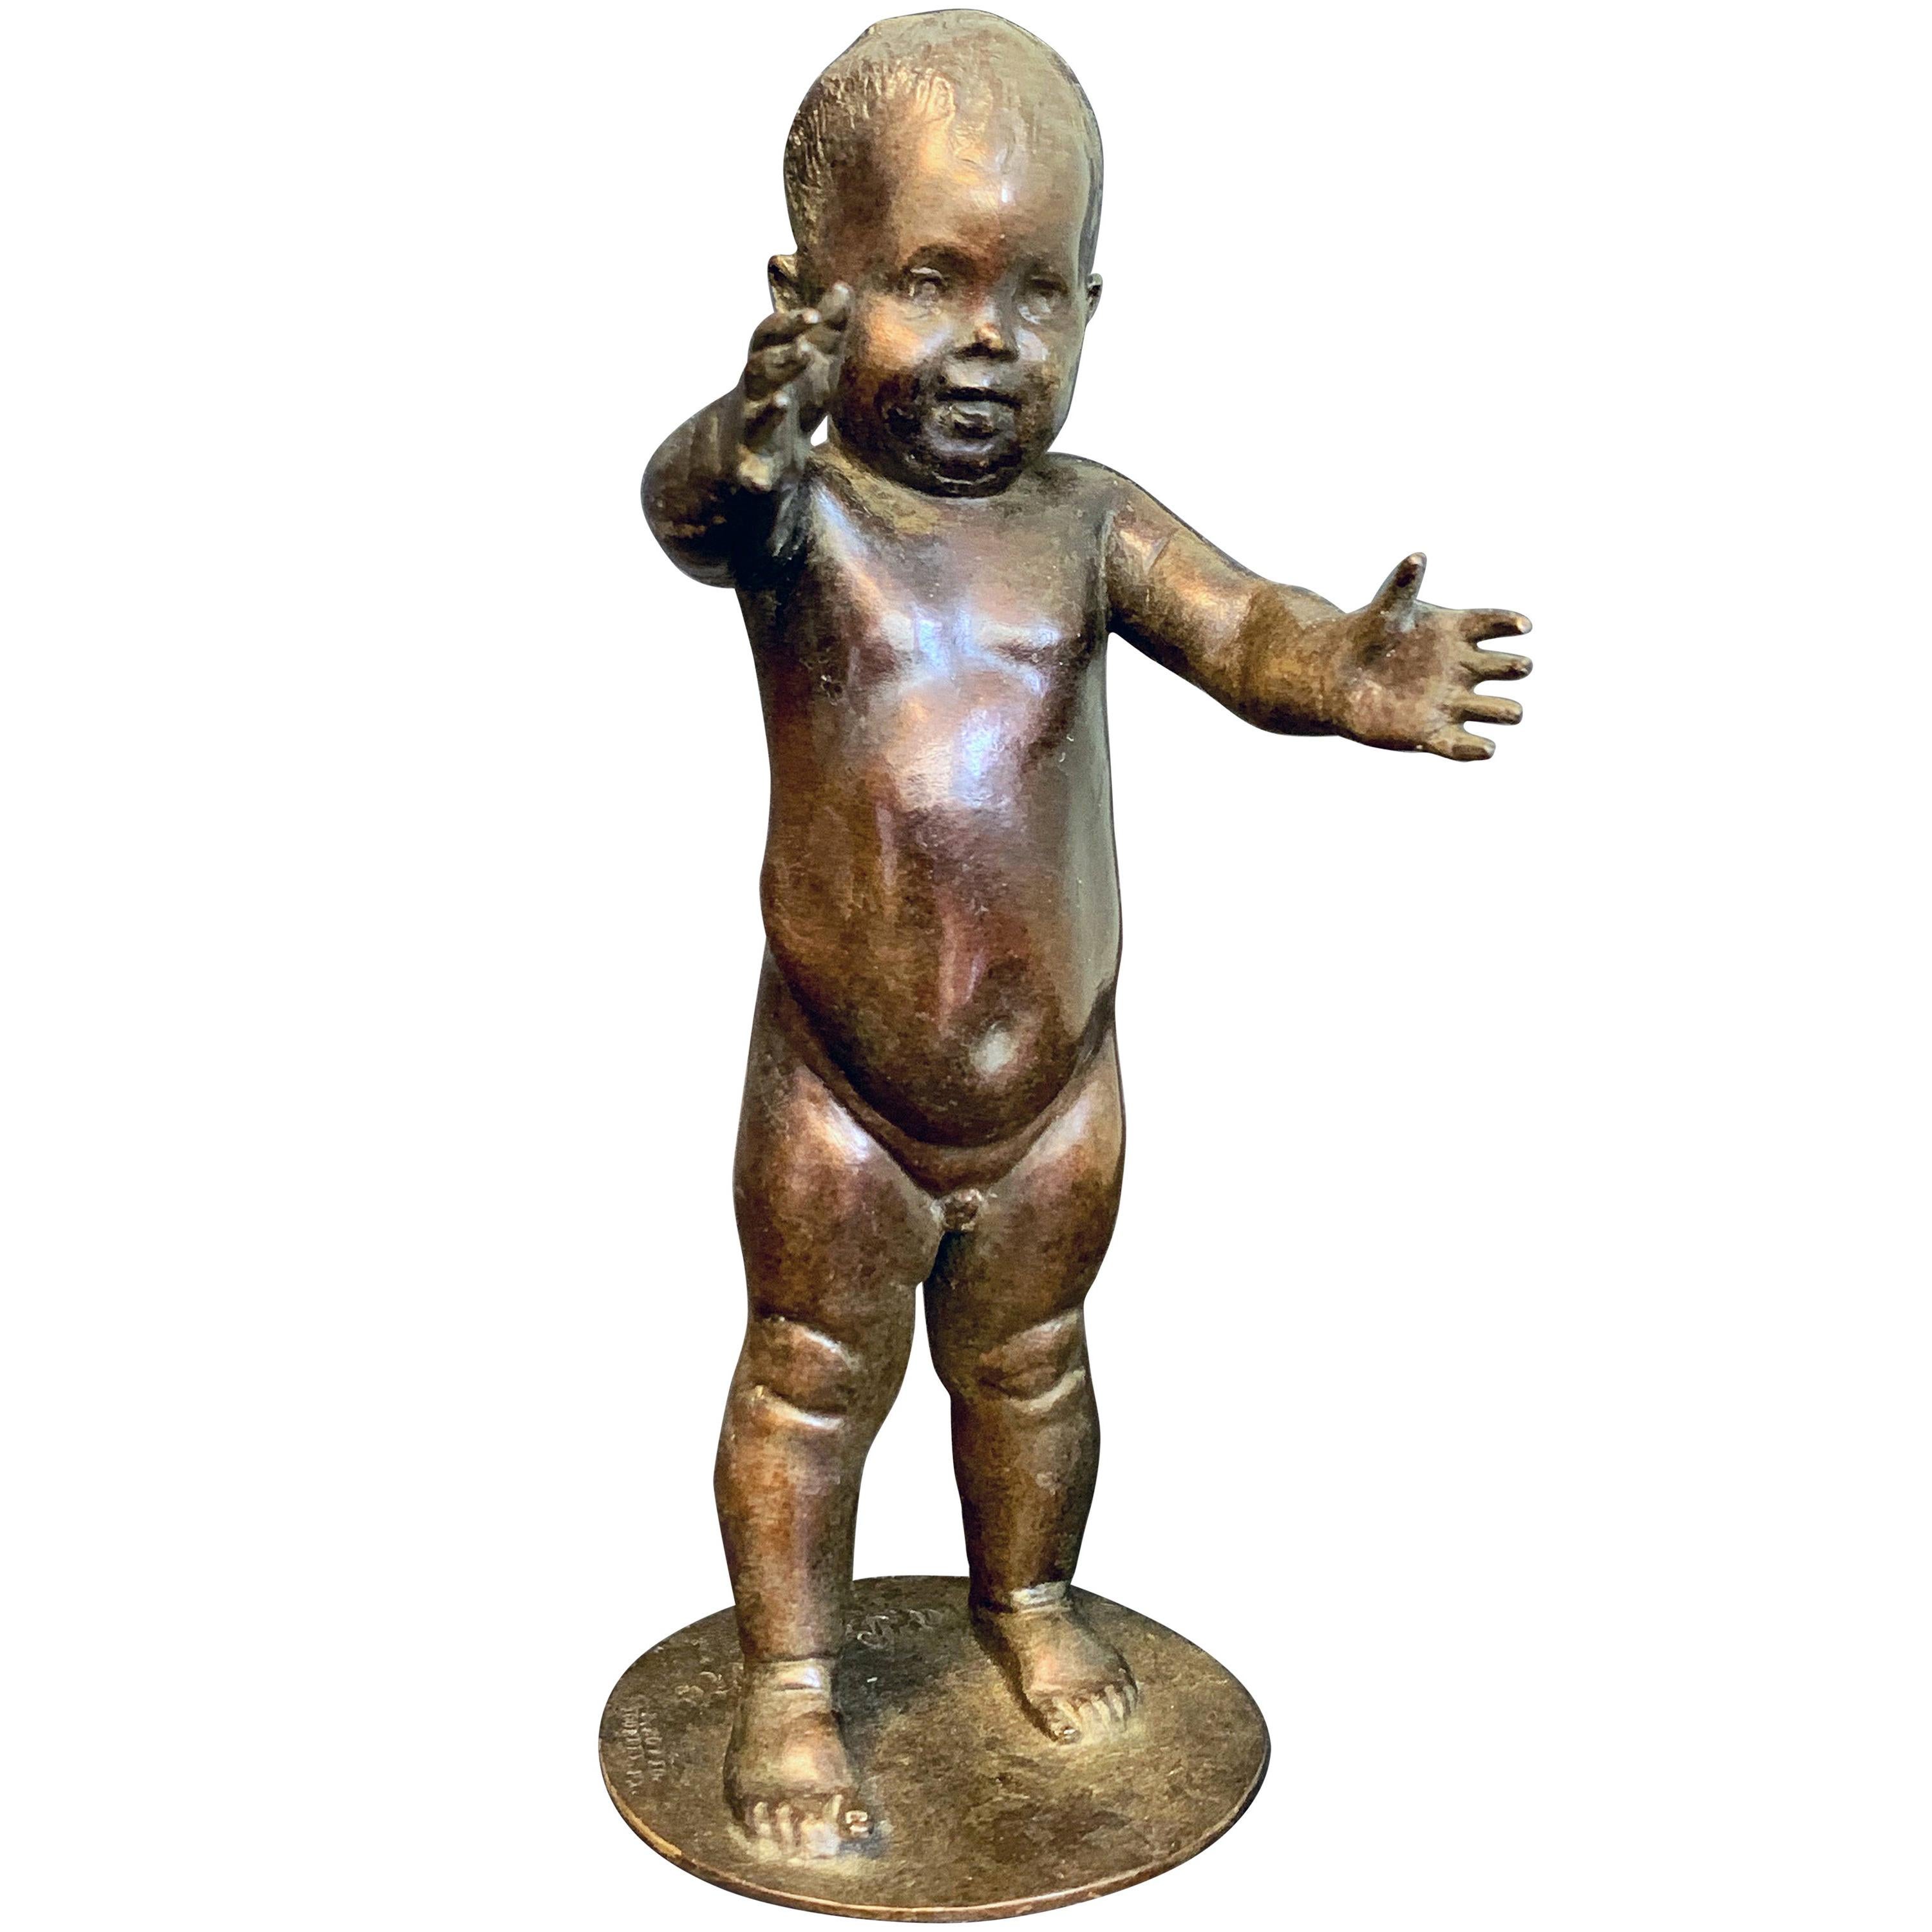 "Baby's First Step, " Charming, Rare Bronze Sculpture by Piccirilli for LaGuardia